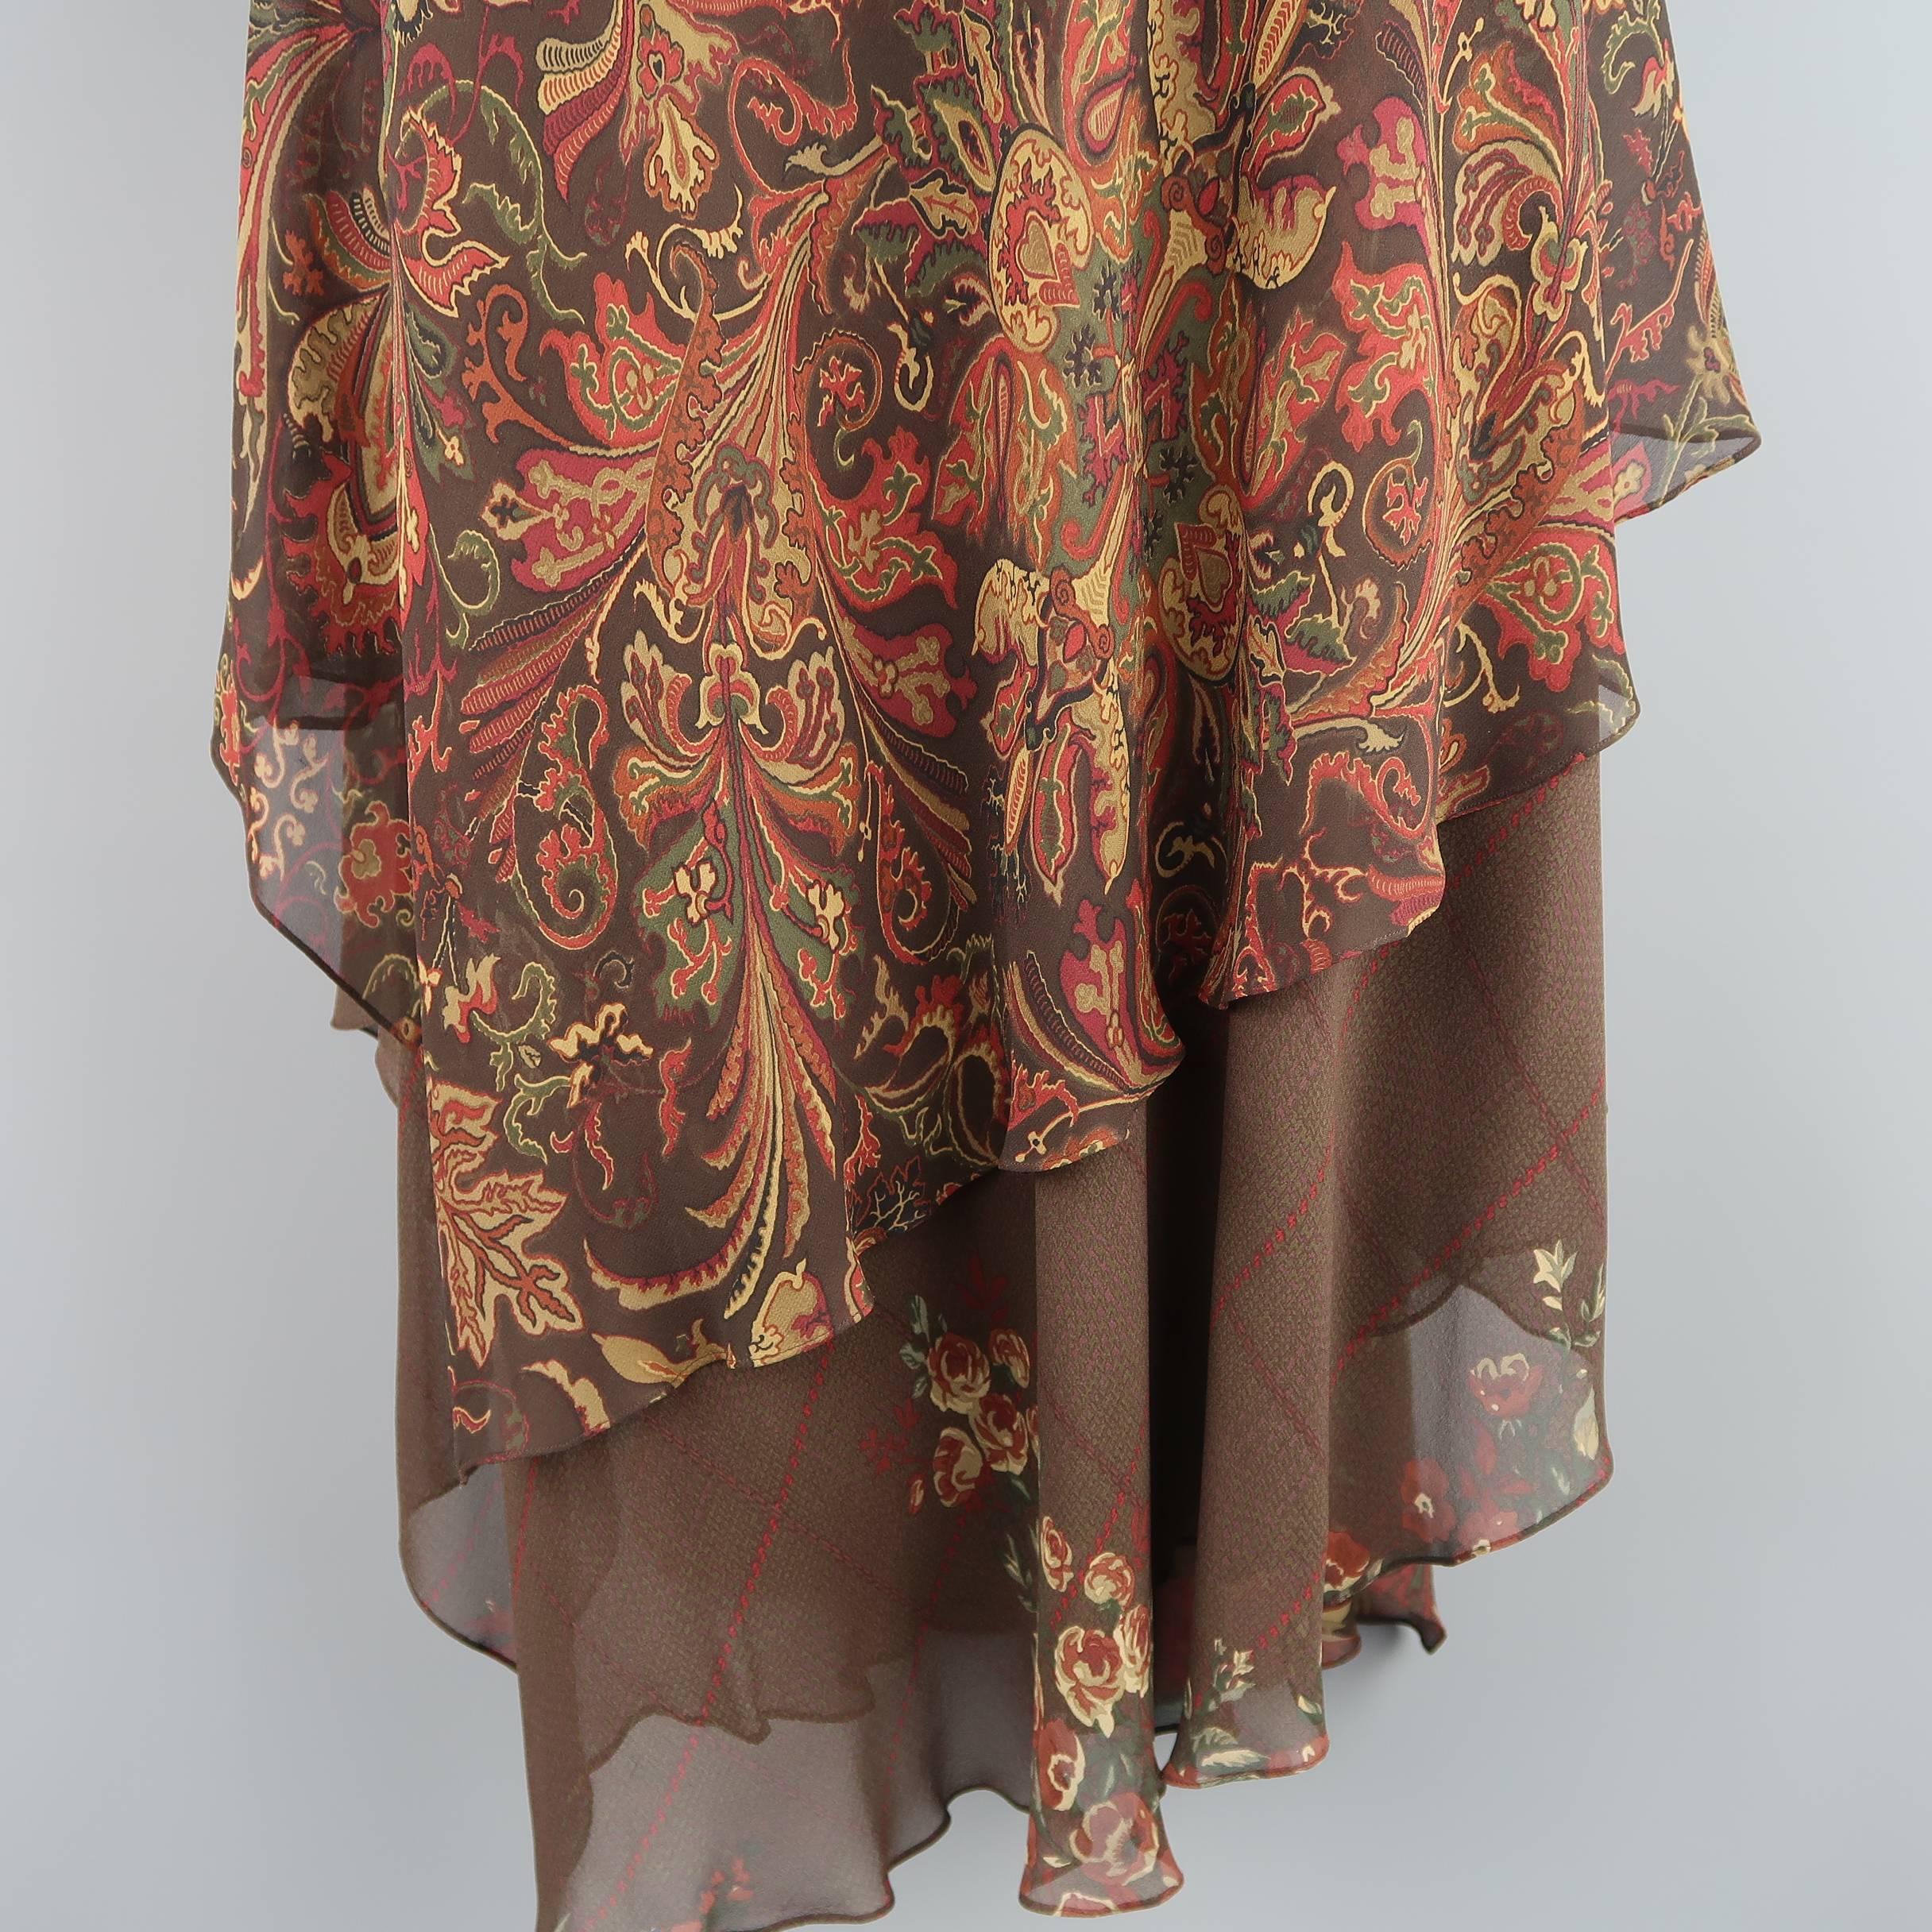 RALPH LAUREN BLACK LABEL maxi skirt comes in brown and dark red paisley print silk chiffon and features cascading asymmetrical ruffled layers with a floral and plaid liner.
 
Excellent Pre-Owned Condition.
Marked: 10
 
Measurements:
 
Waist: 34